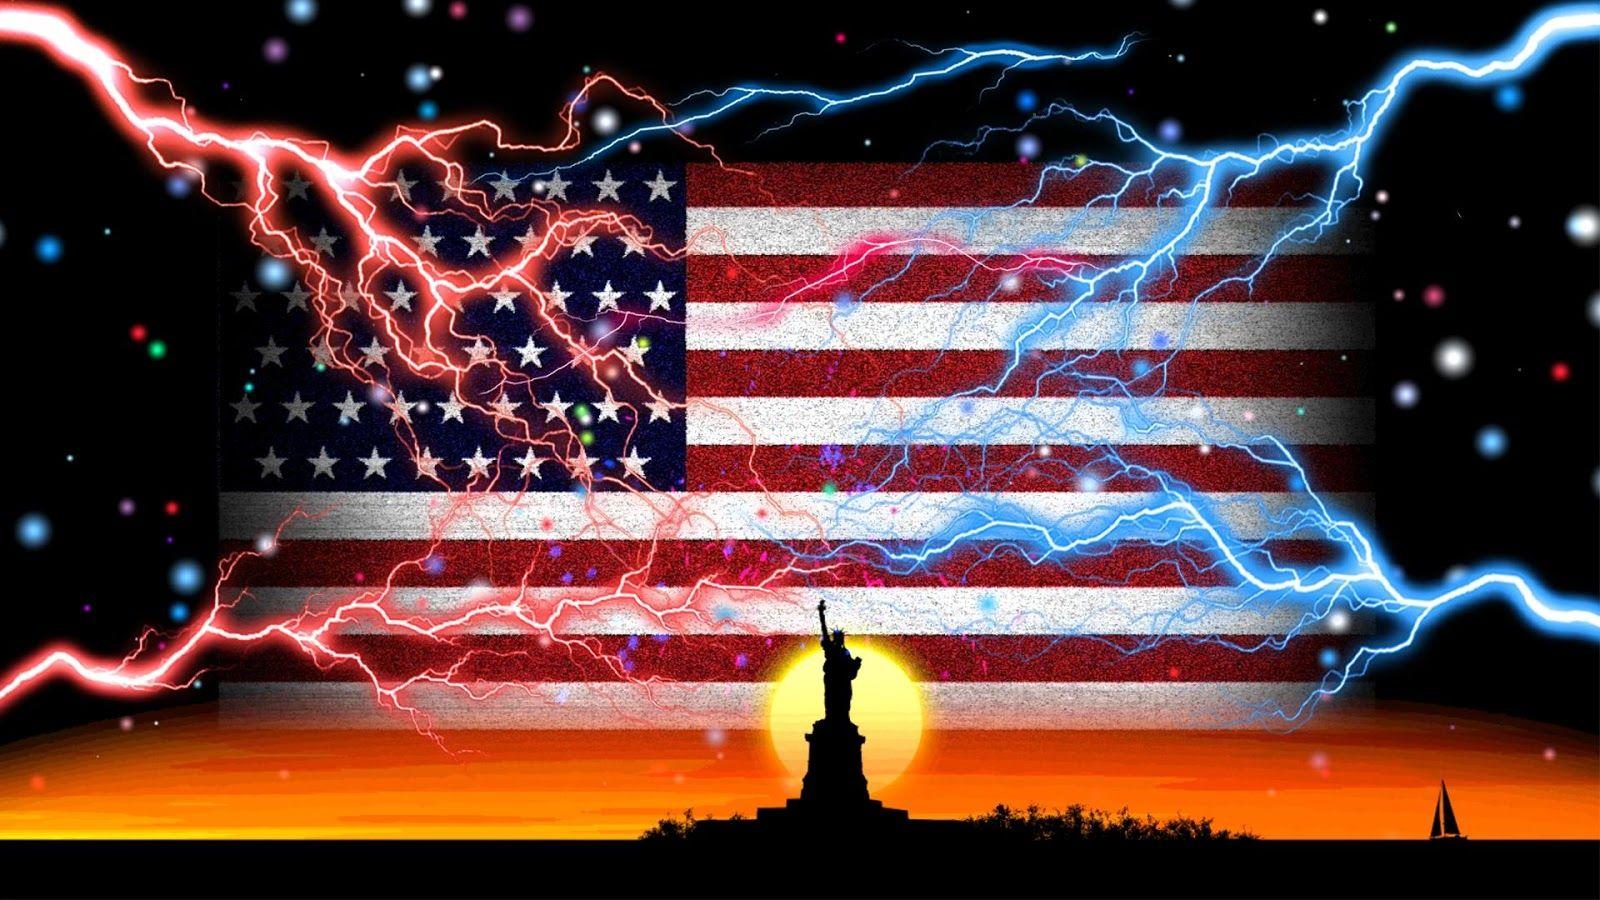 American Flag wallpaper by Crooklynite  Download on ZEDGE  63d9